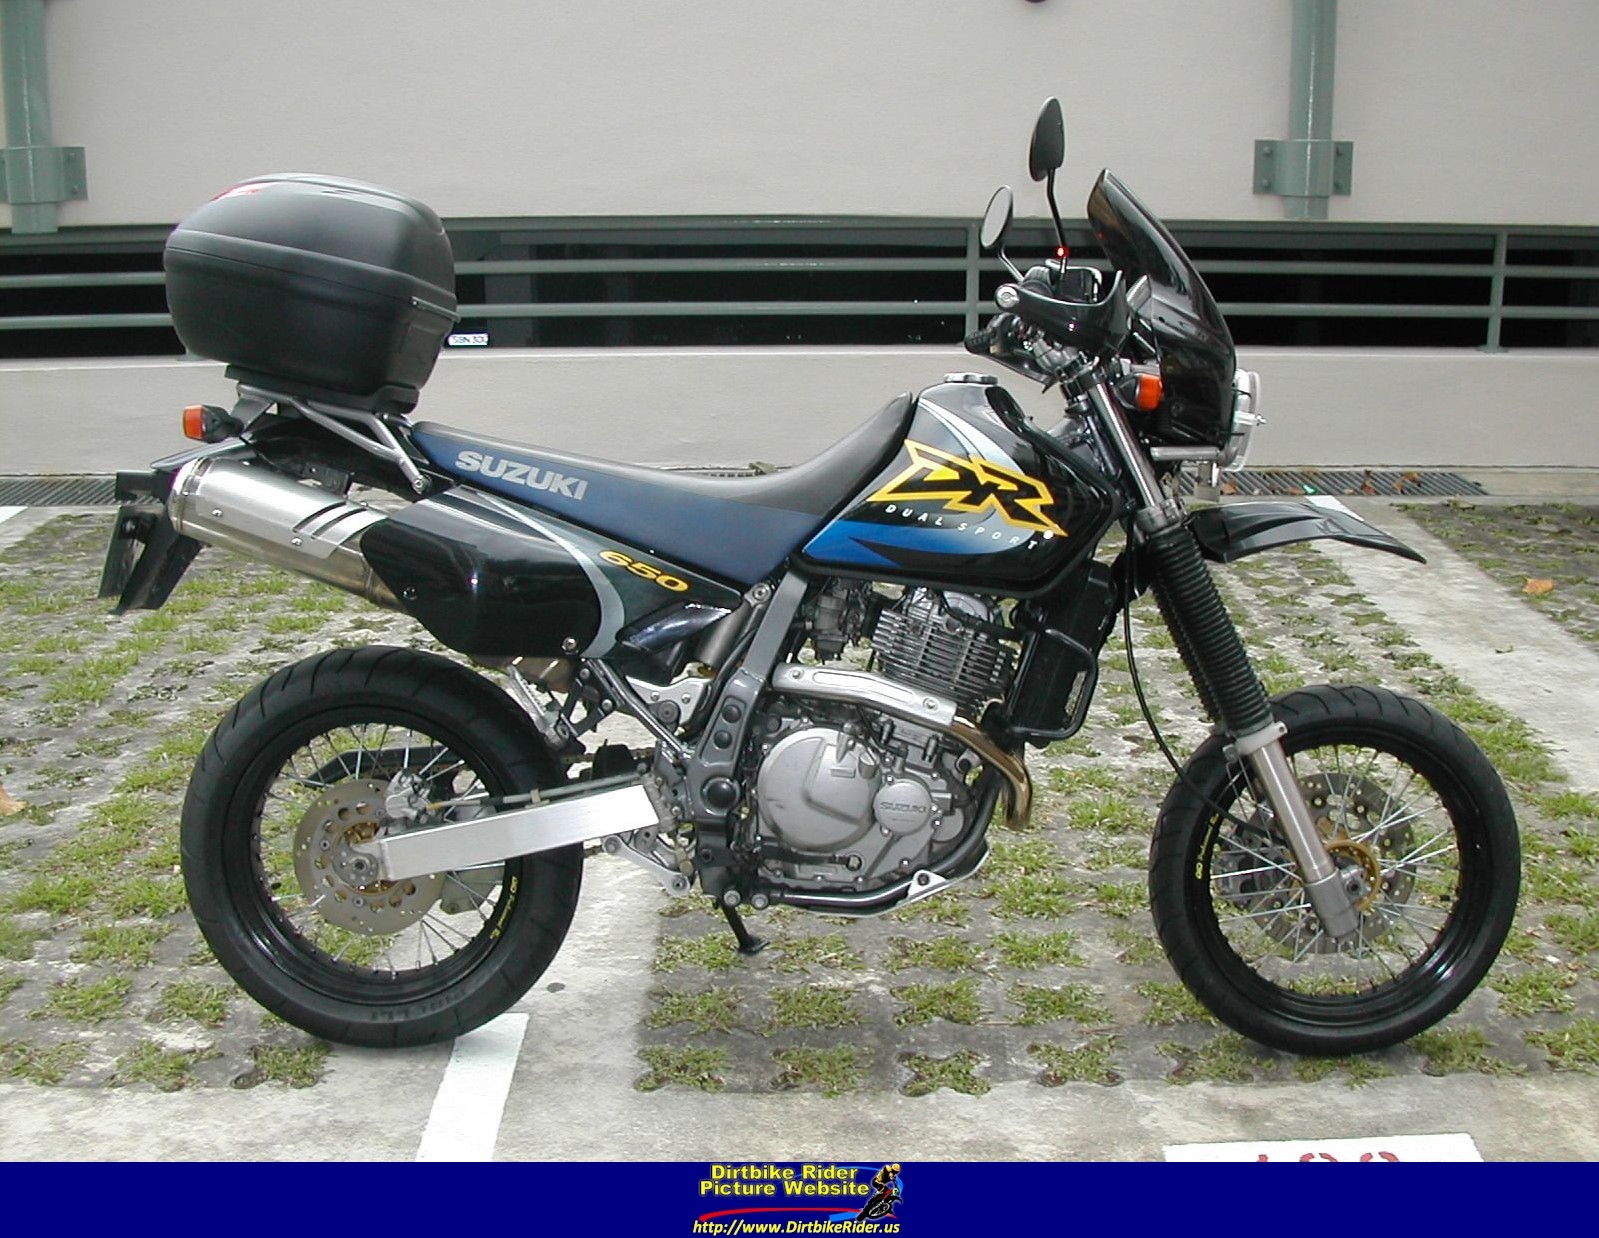 Review of Suzuki DR 650 SE 1999 pictures, live photos